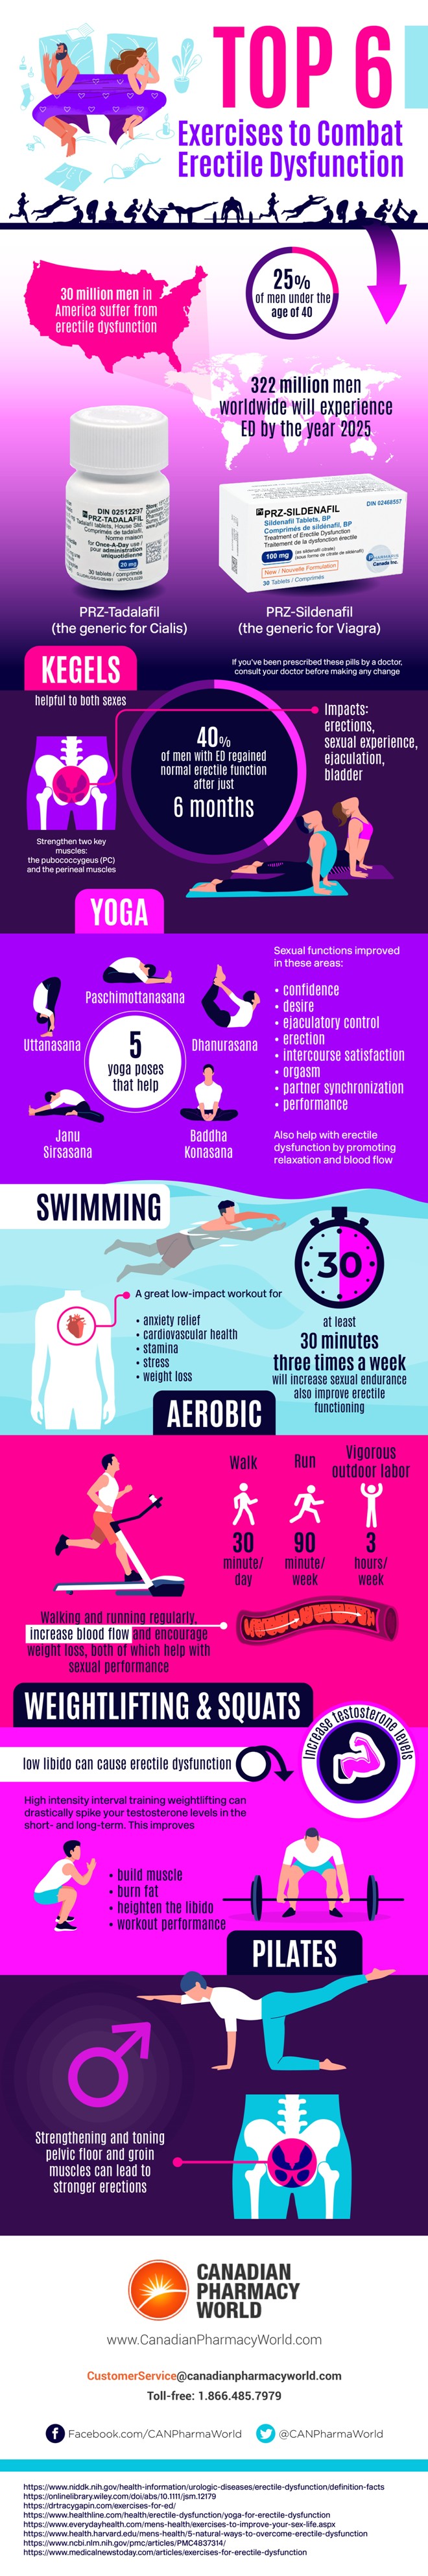 Top 6 Exercises to Combat Erectile Dysfunction Infographic